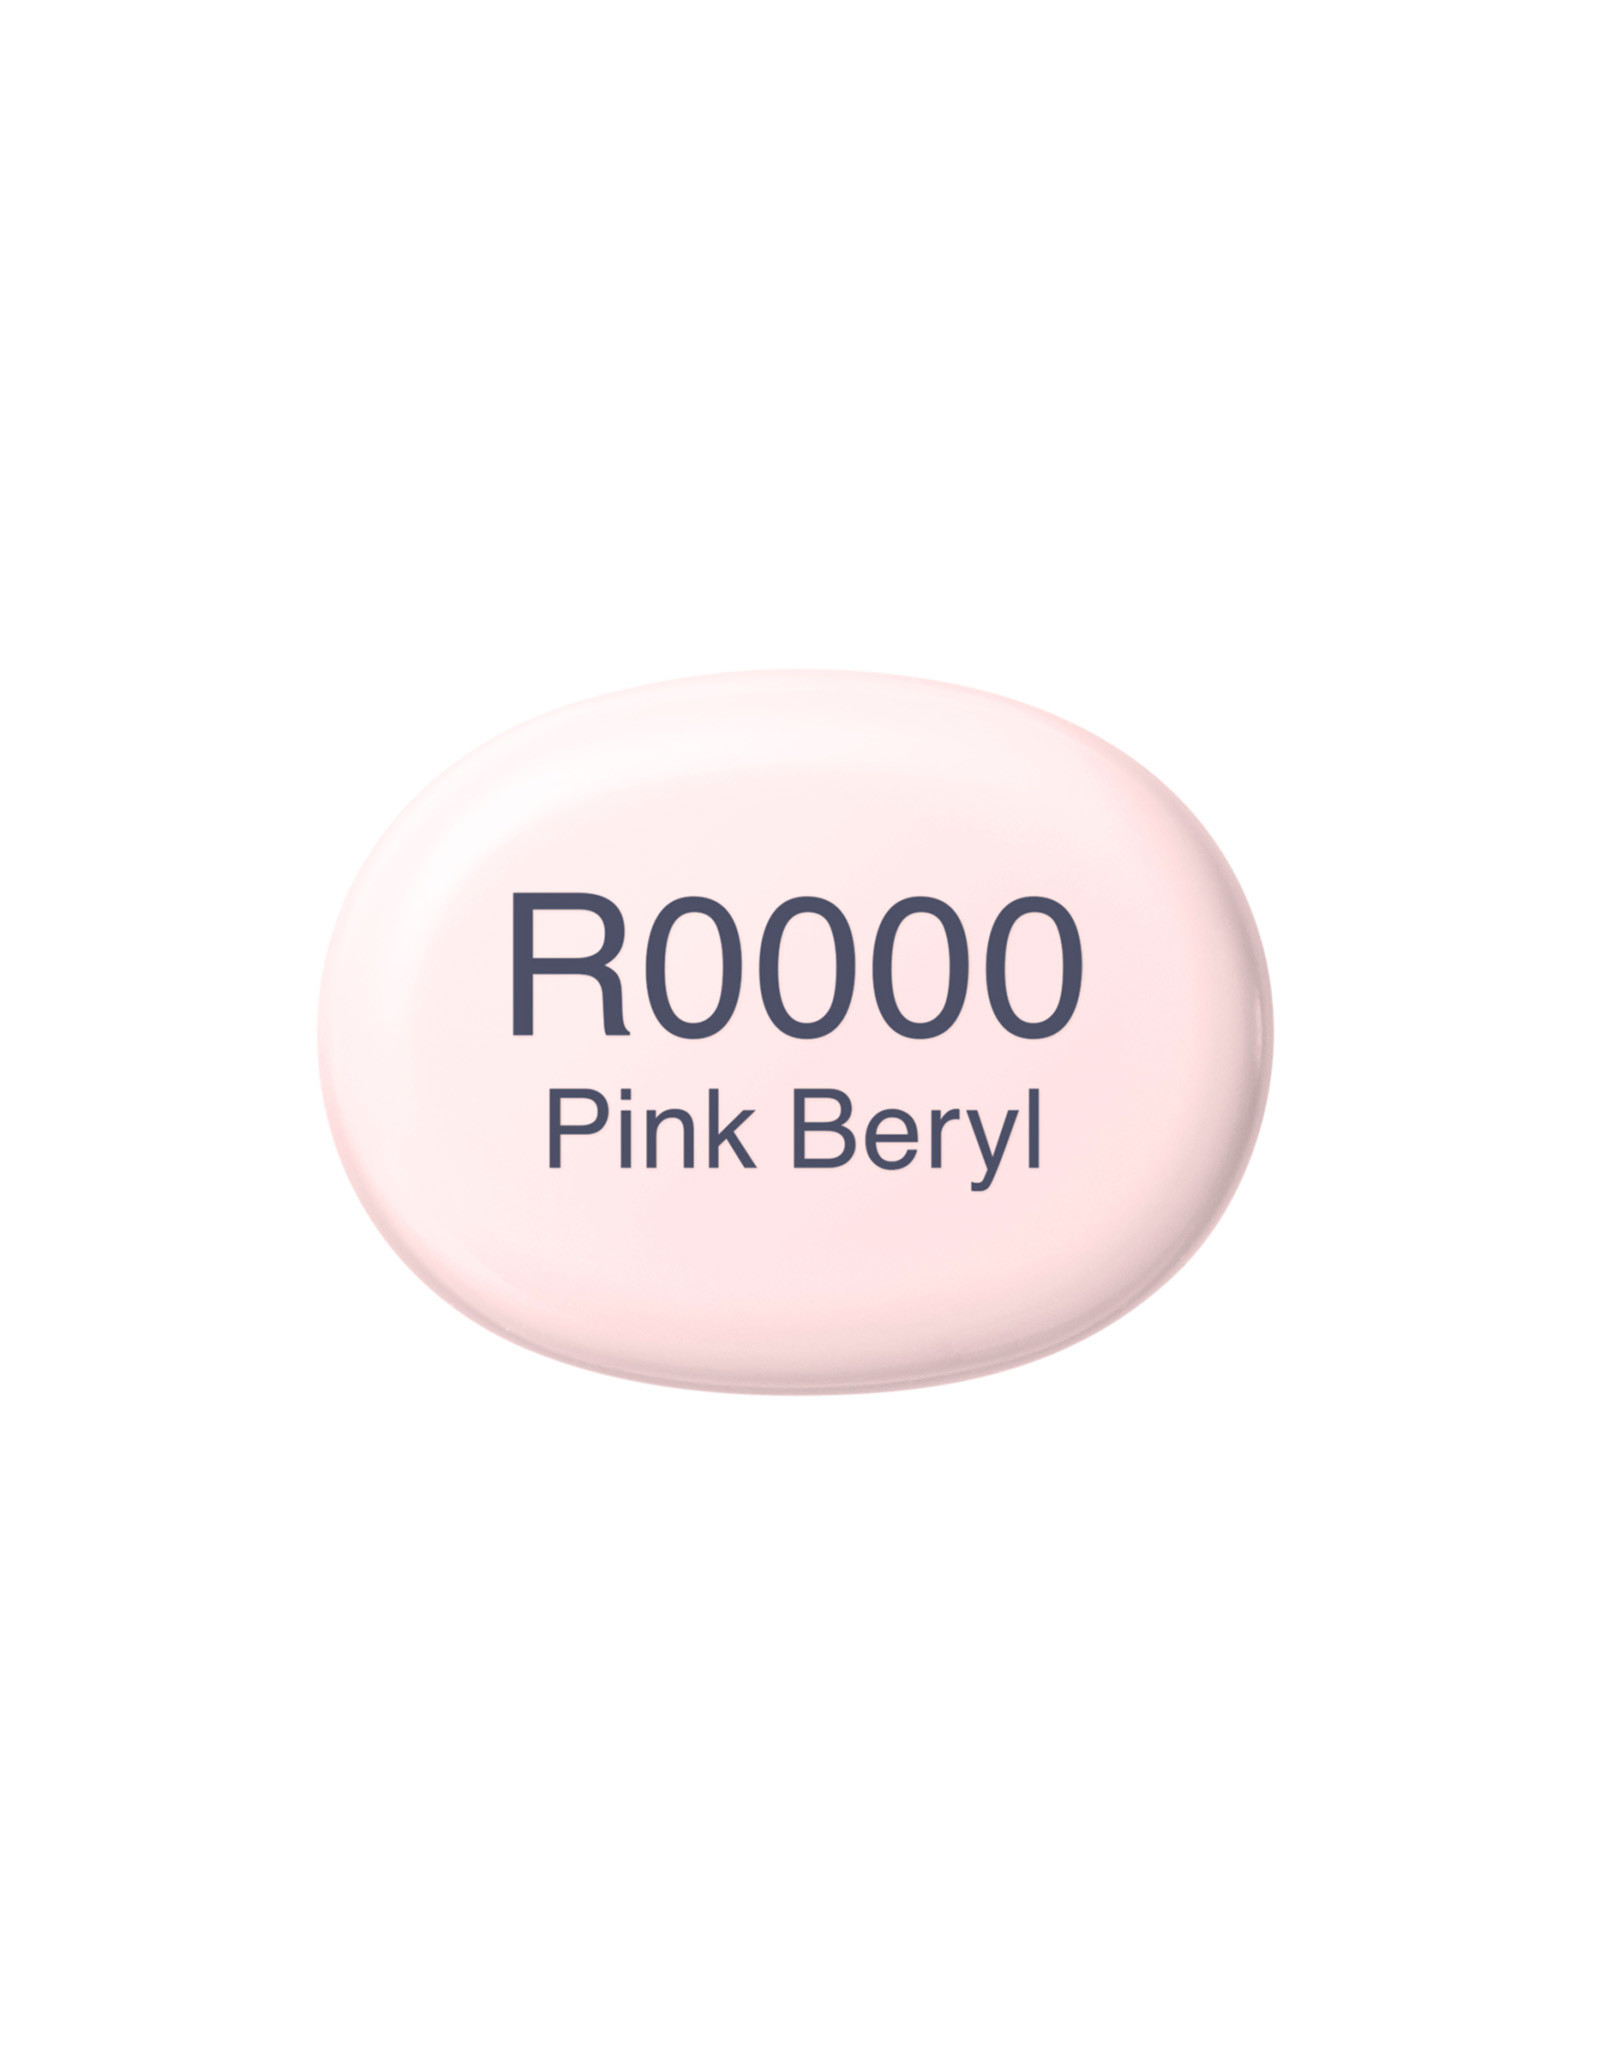 COPIC COPIC Sketch Marker R0000 Pink Beryl